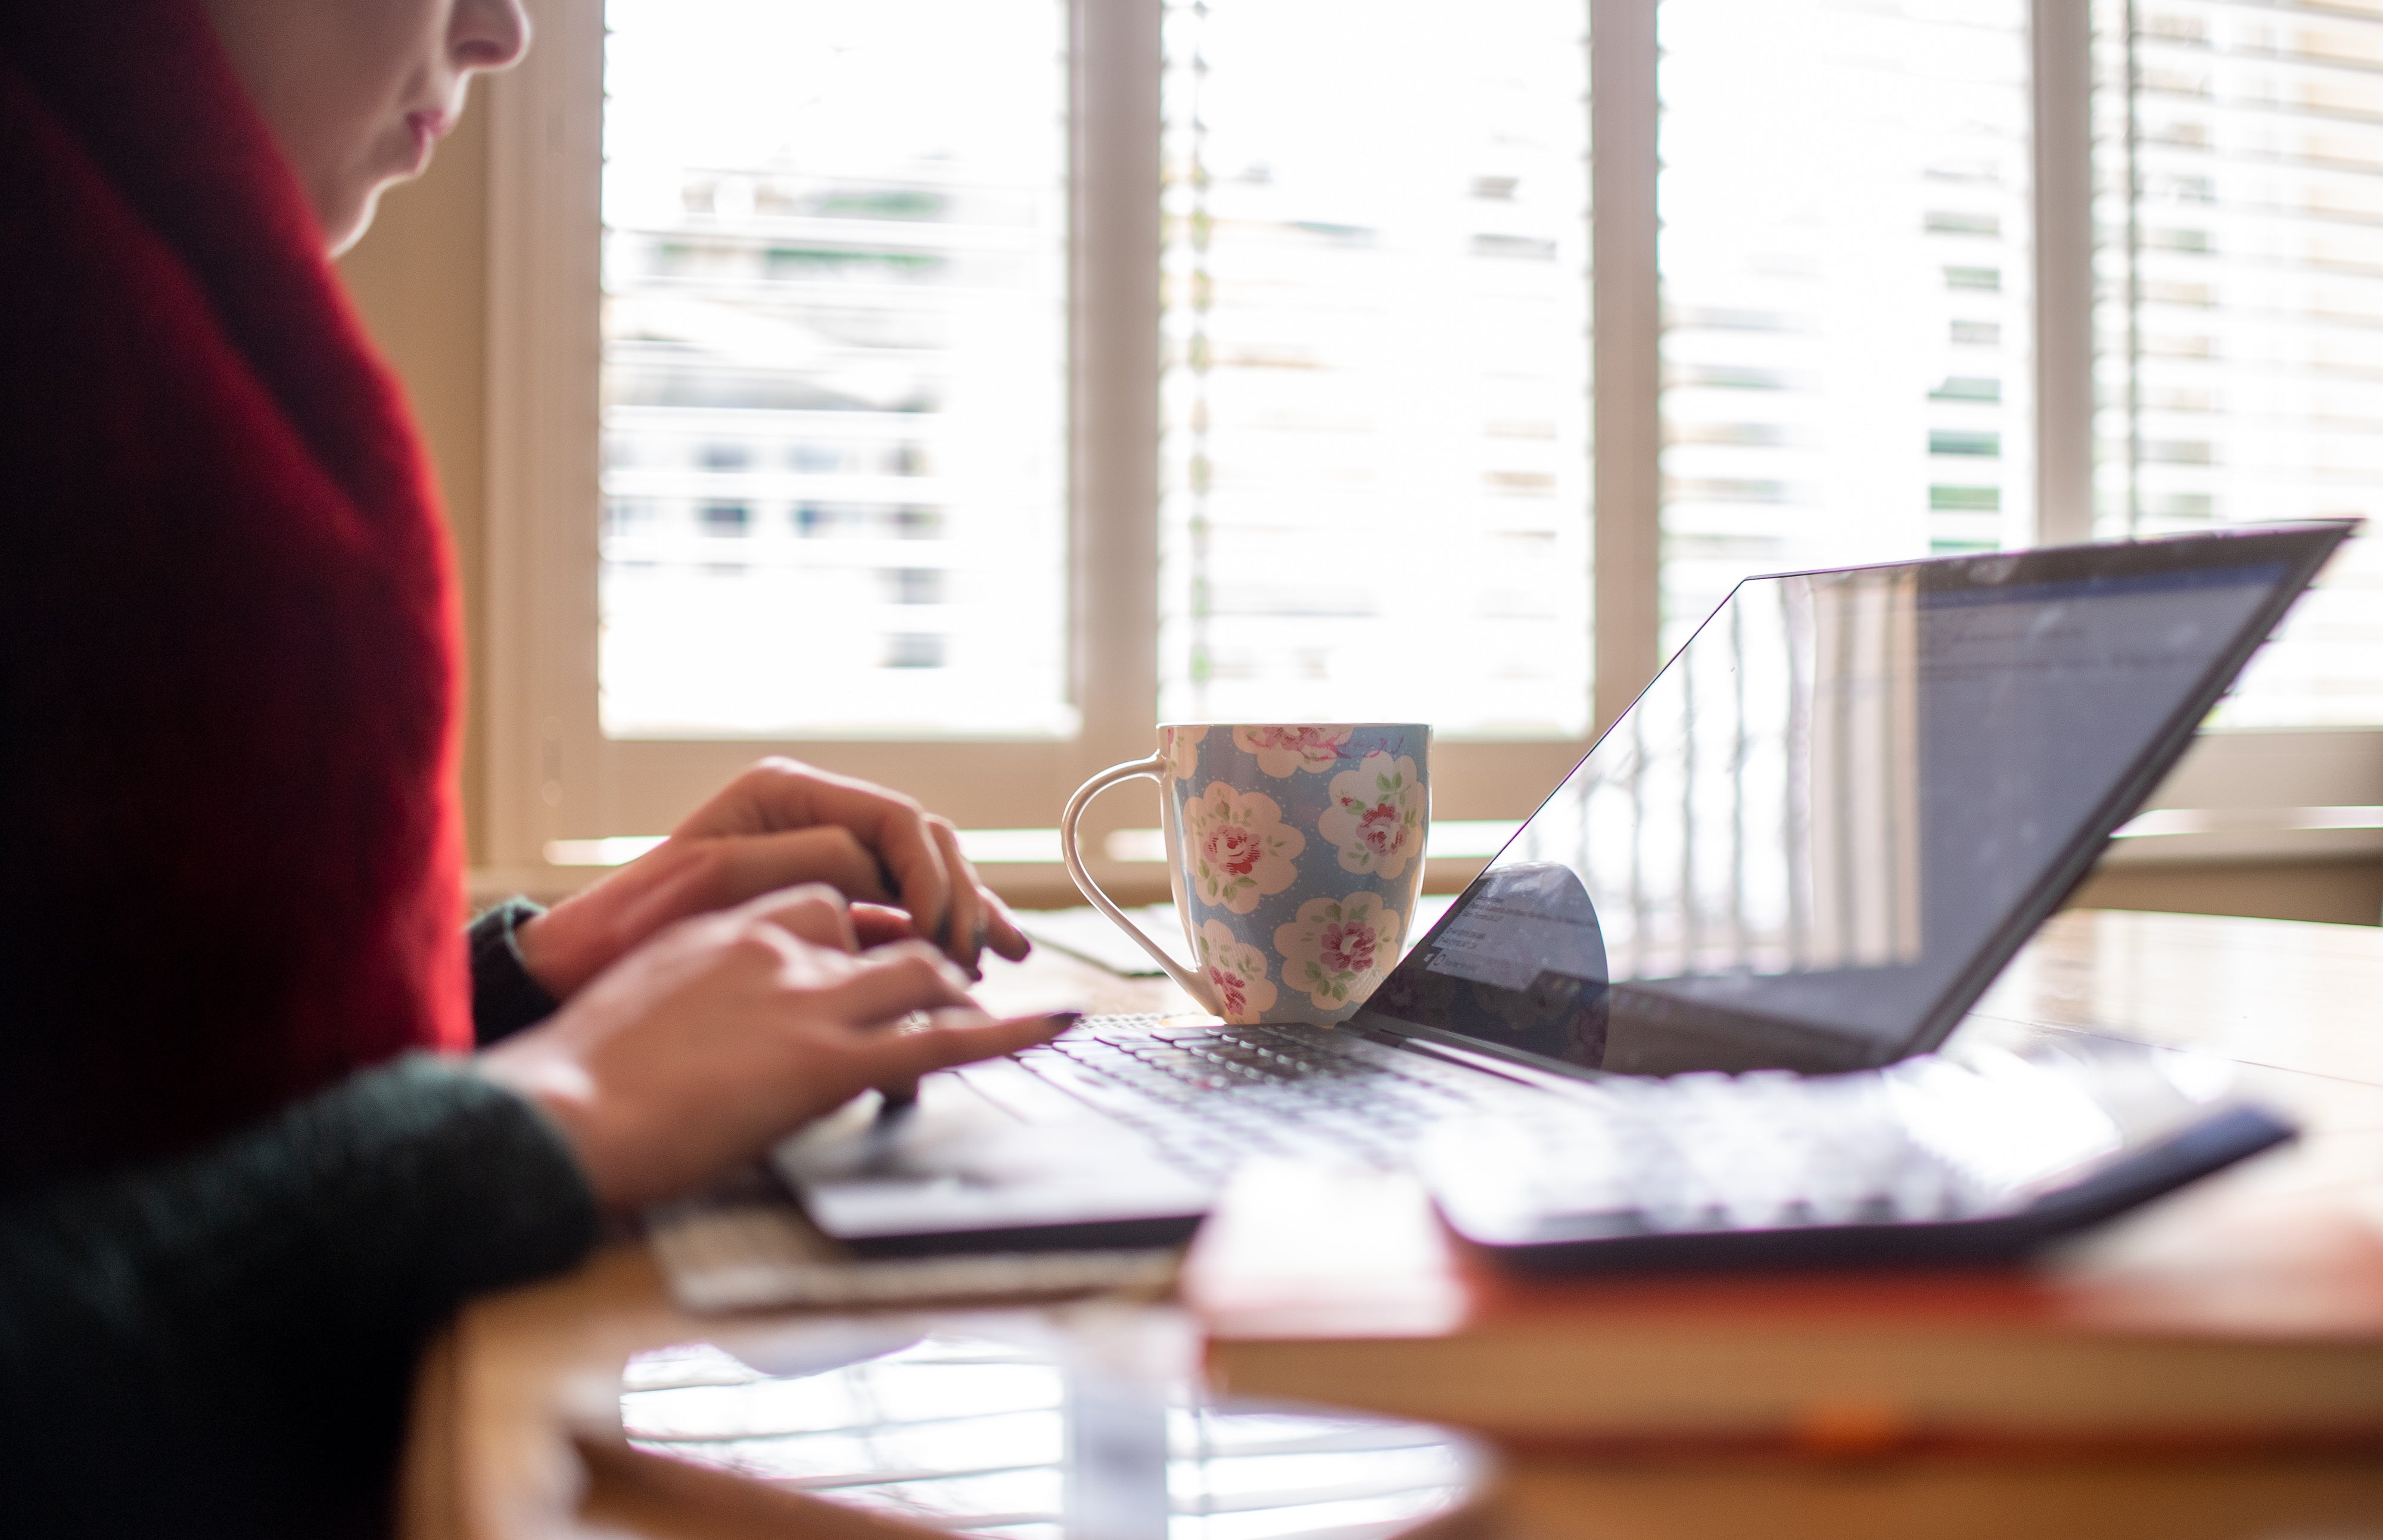 Women are among those most likely to work from home